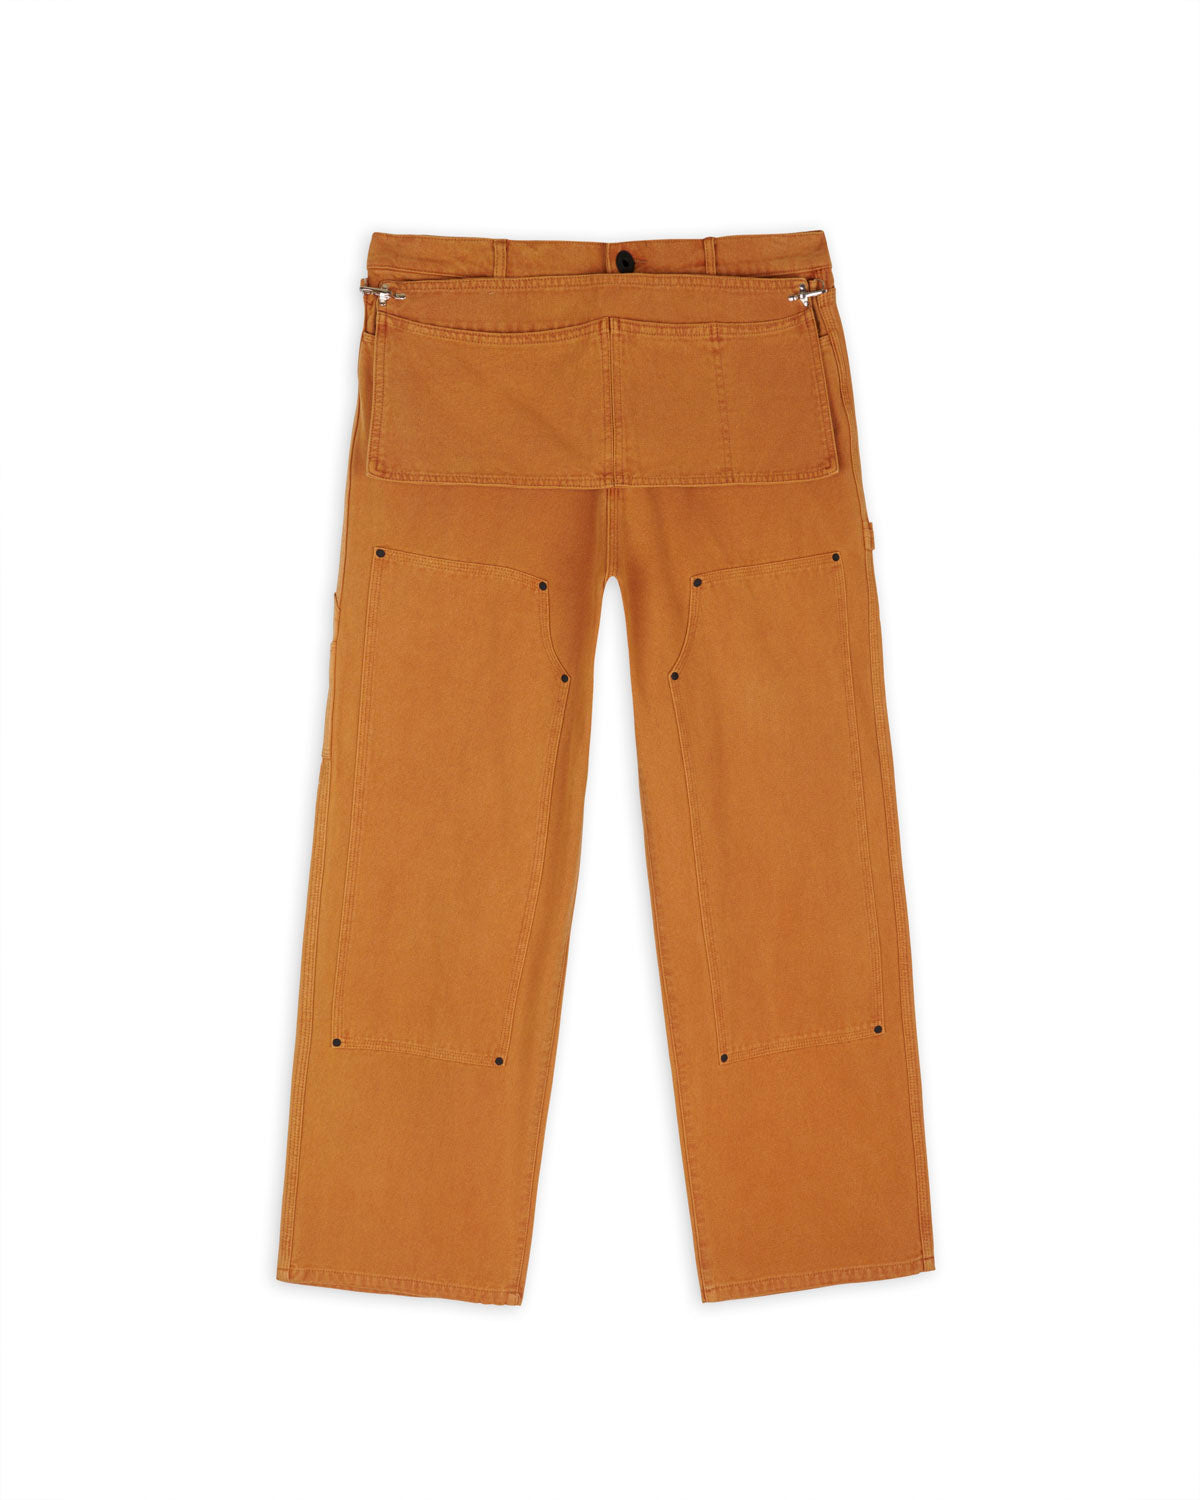 Canvas Gardening Pant - Washed Duck Brown